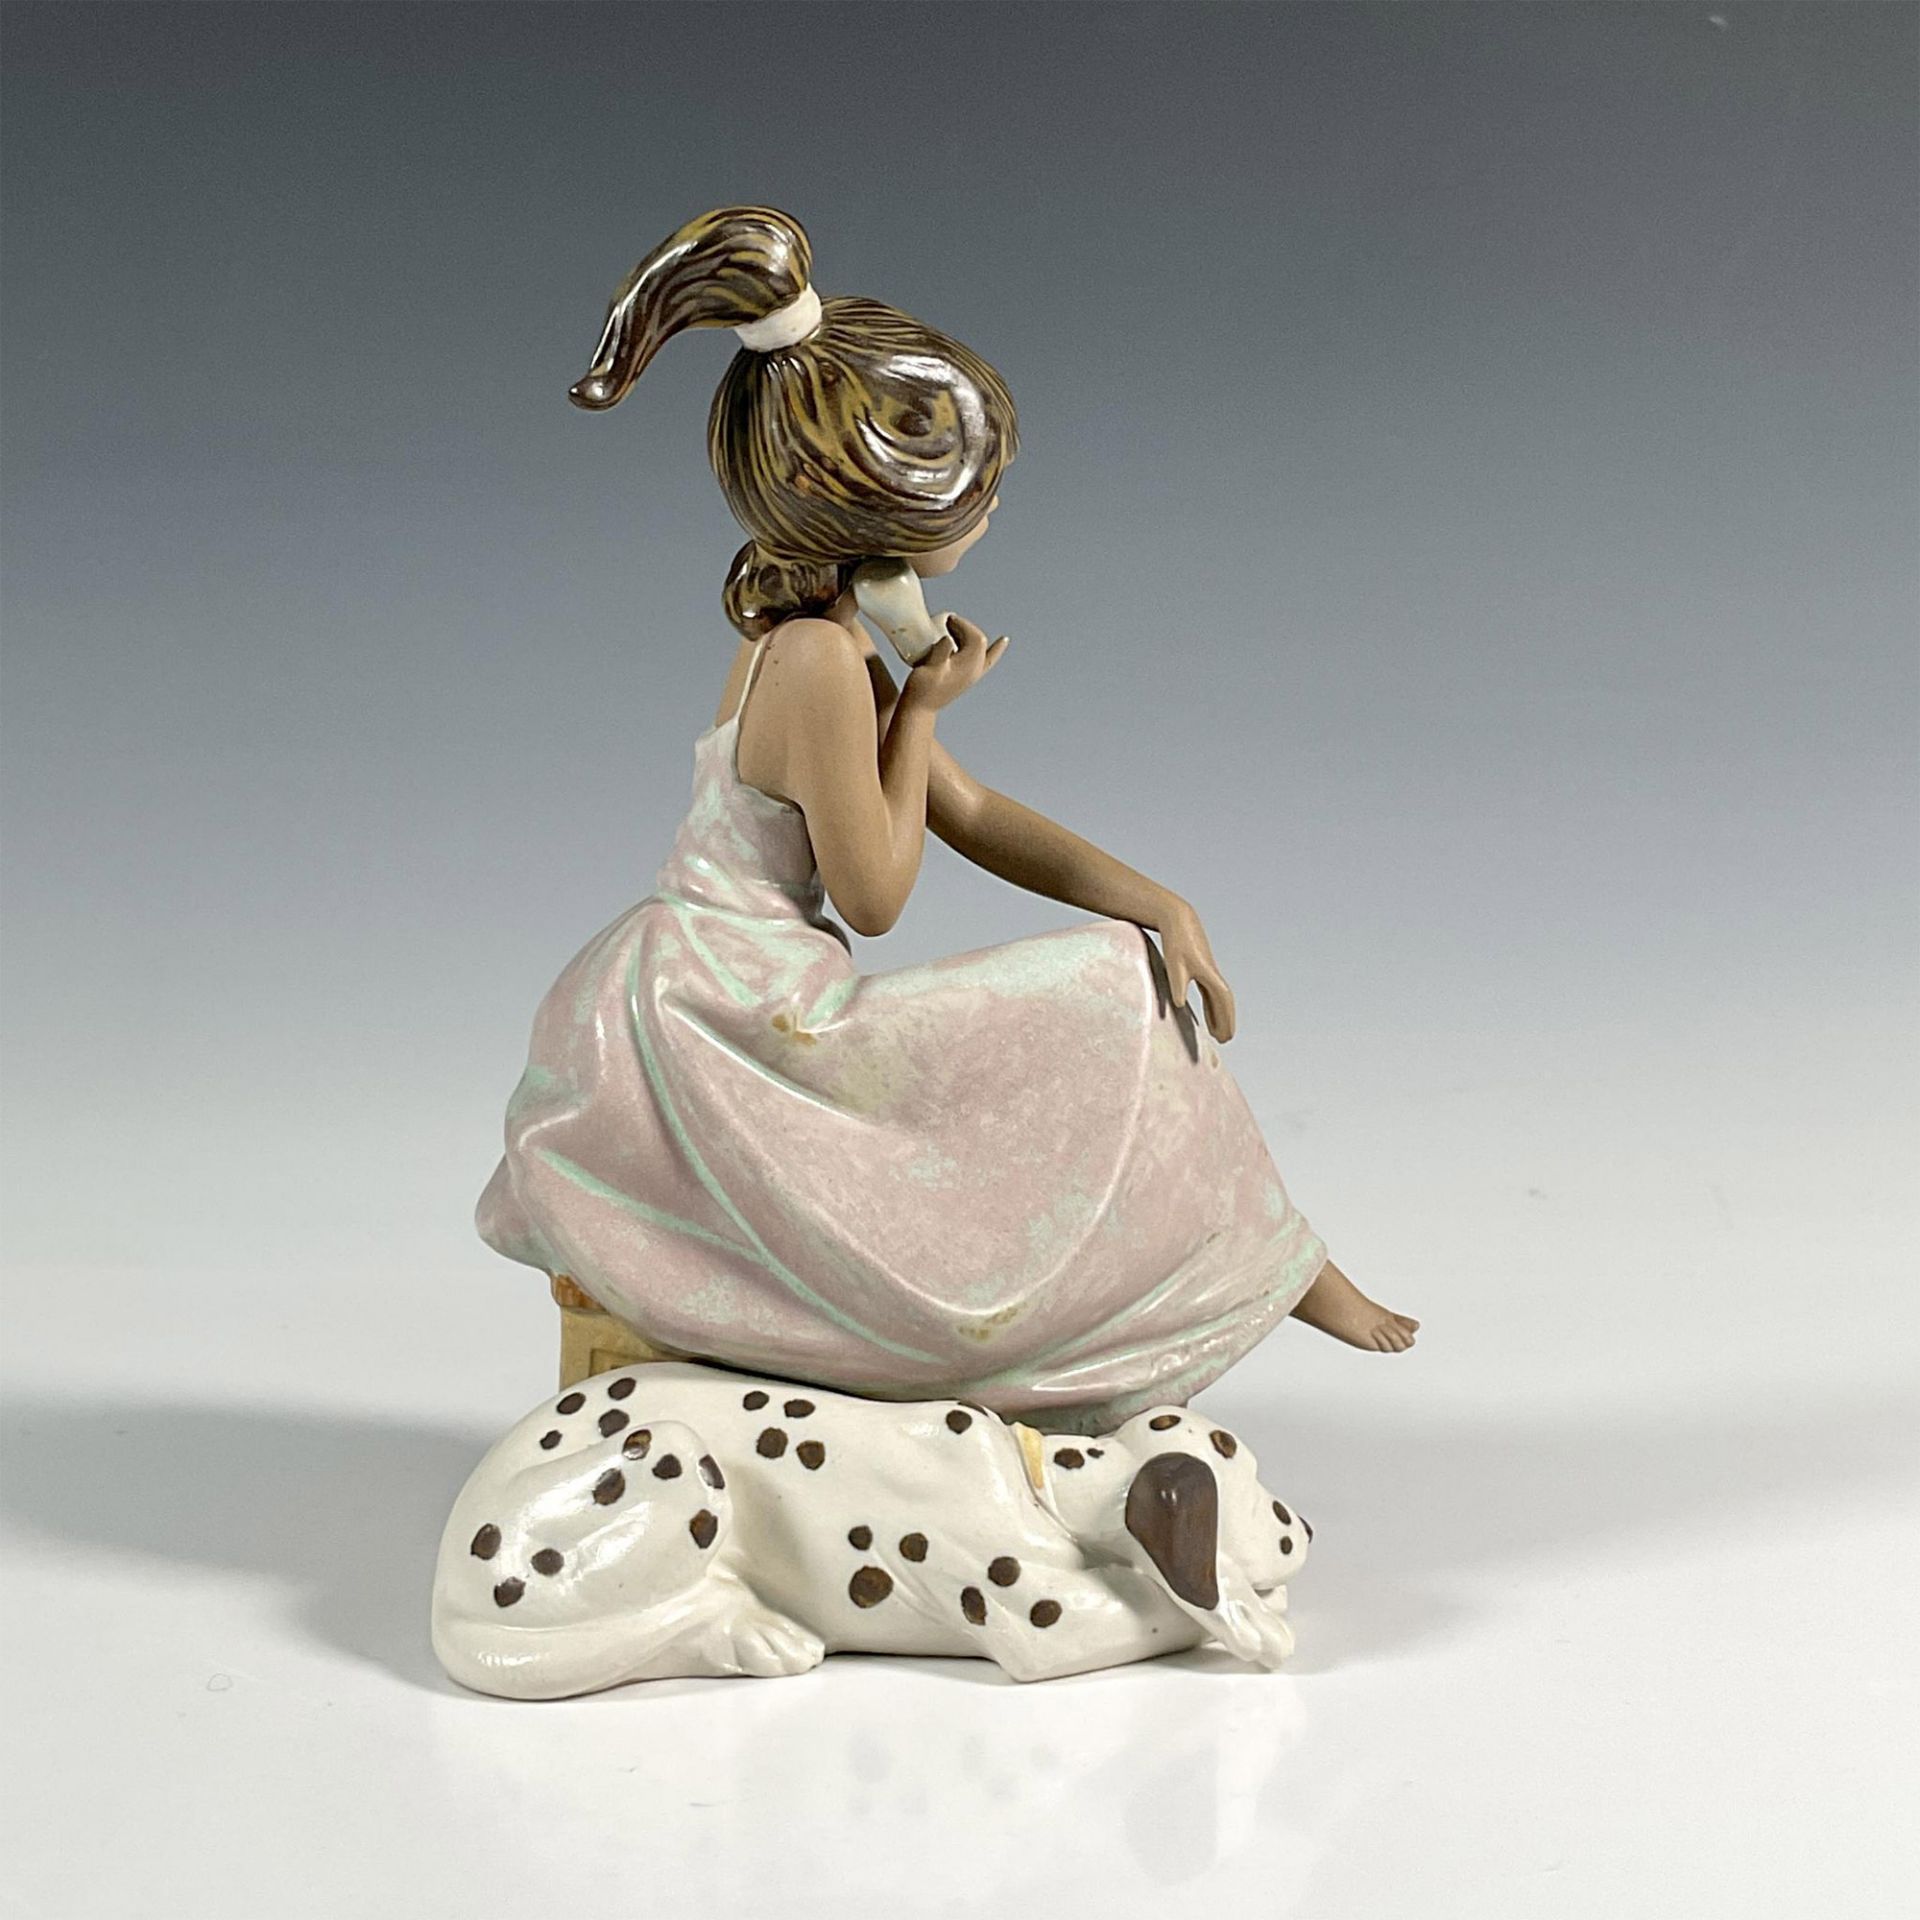 Chit Chat 1015466 - Lladro Porcelain Figurine - Image 5 of 8